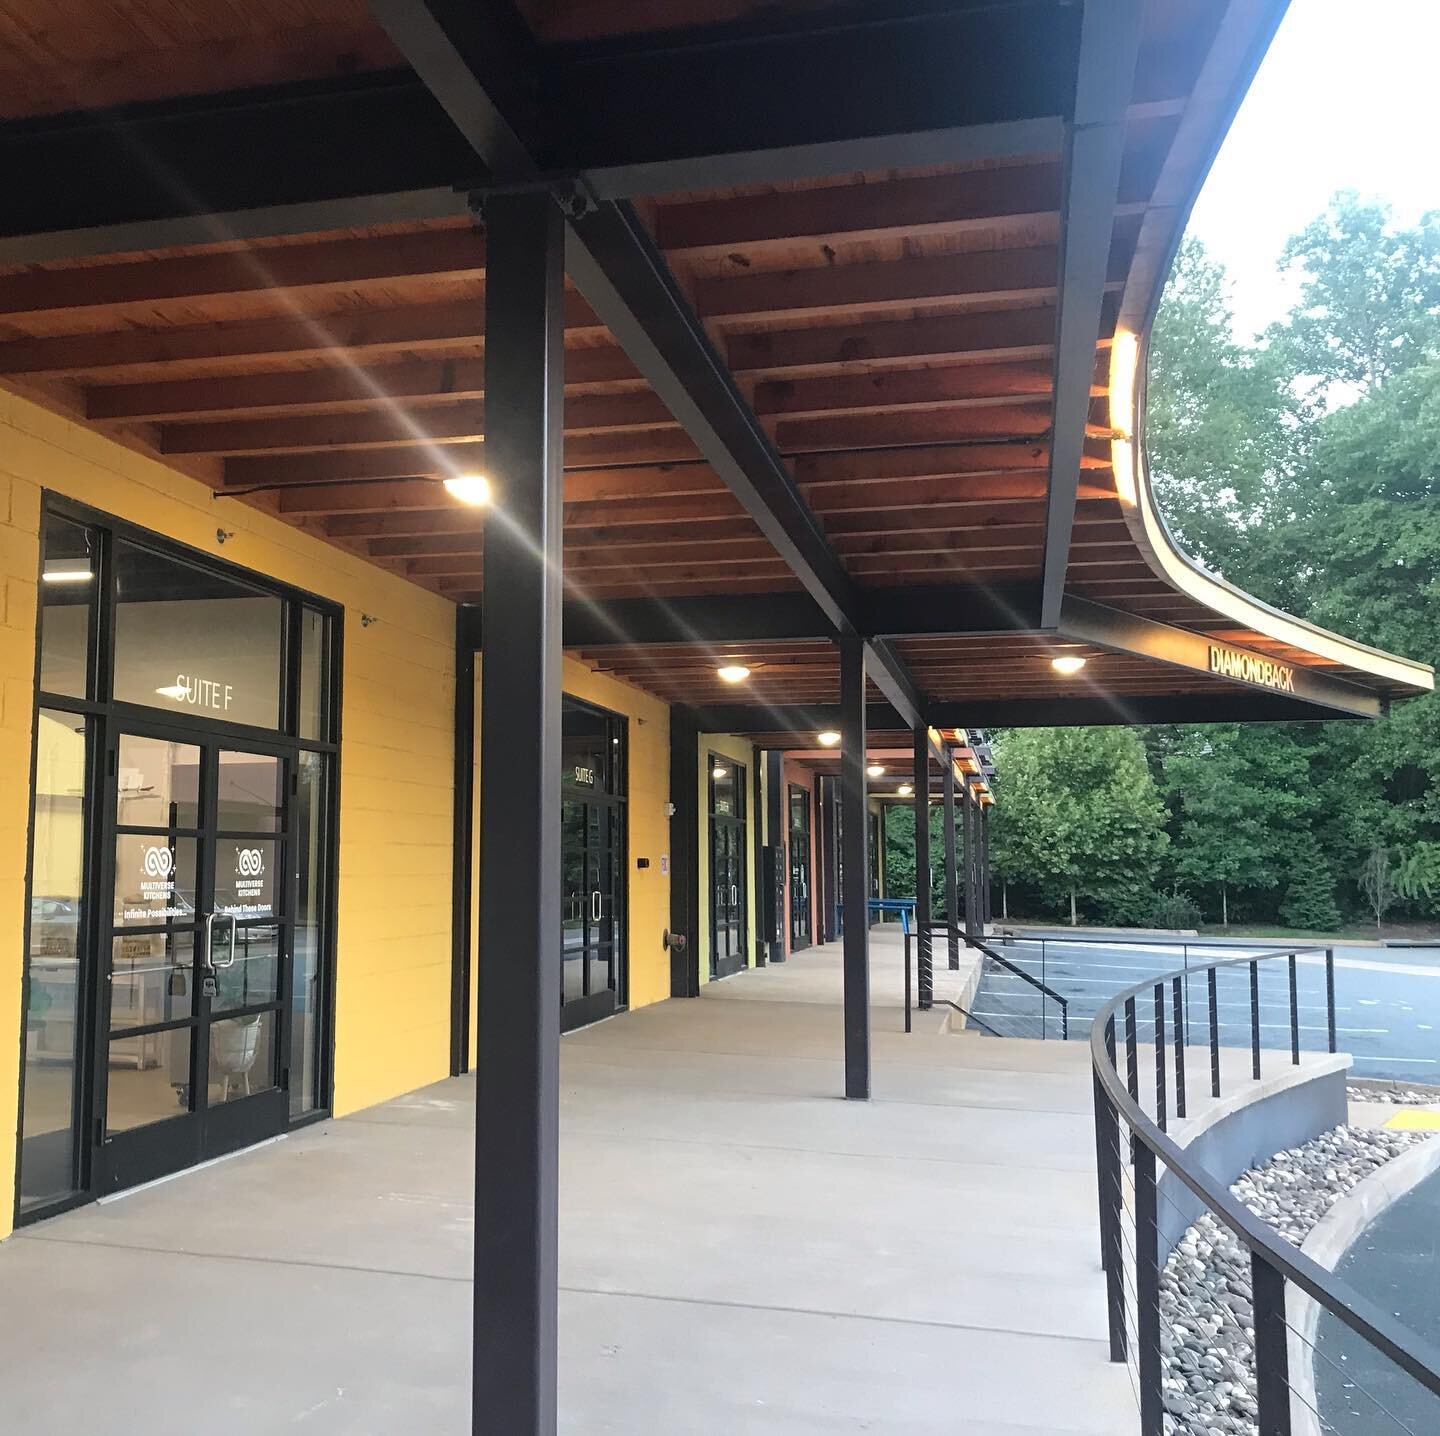 It is so fun to see this place come to life, 7 years after our collaboration with #woodardproperties . Looking forward to our dinner from #multiversekitchens . #cville #cvillearchitects #charlottesvillearchitects #curryassociates